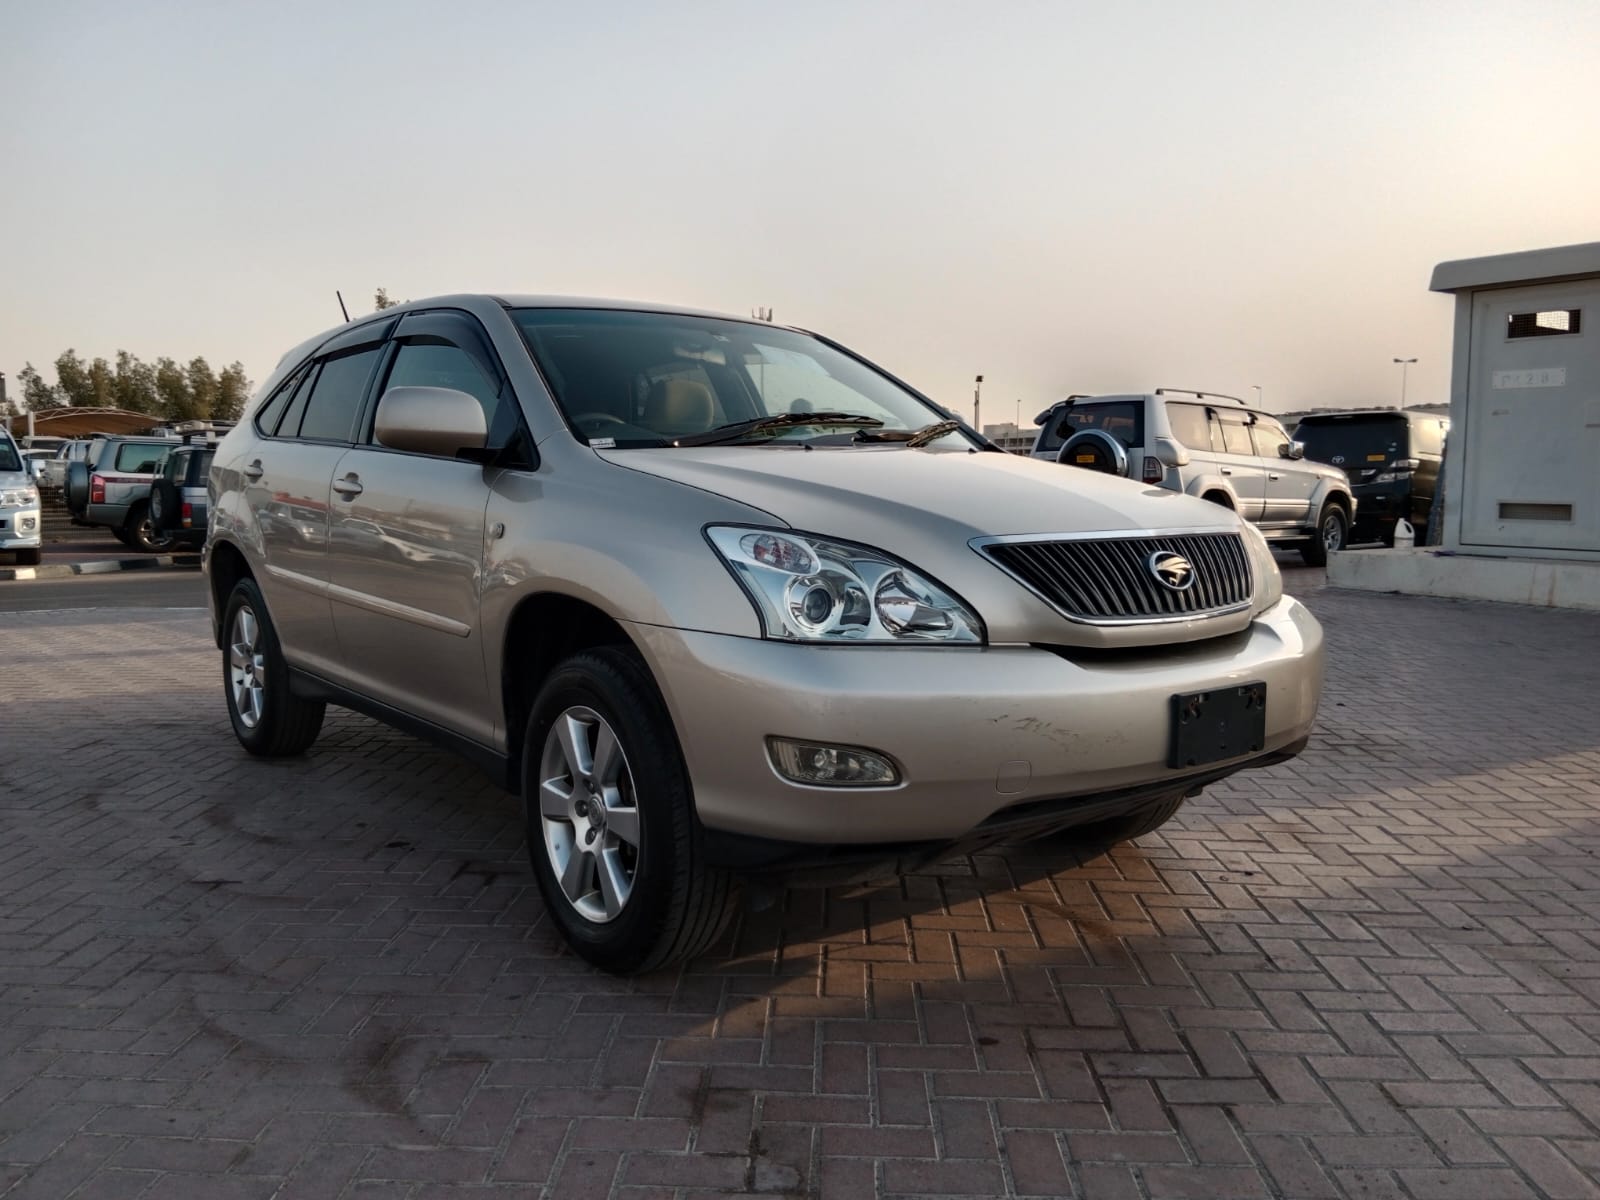 6977 TOYOTA HARRIER 2.4 A/T GOLD